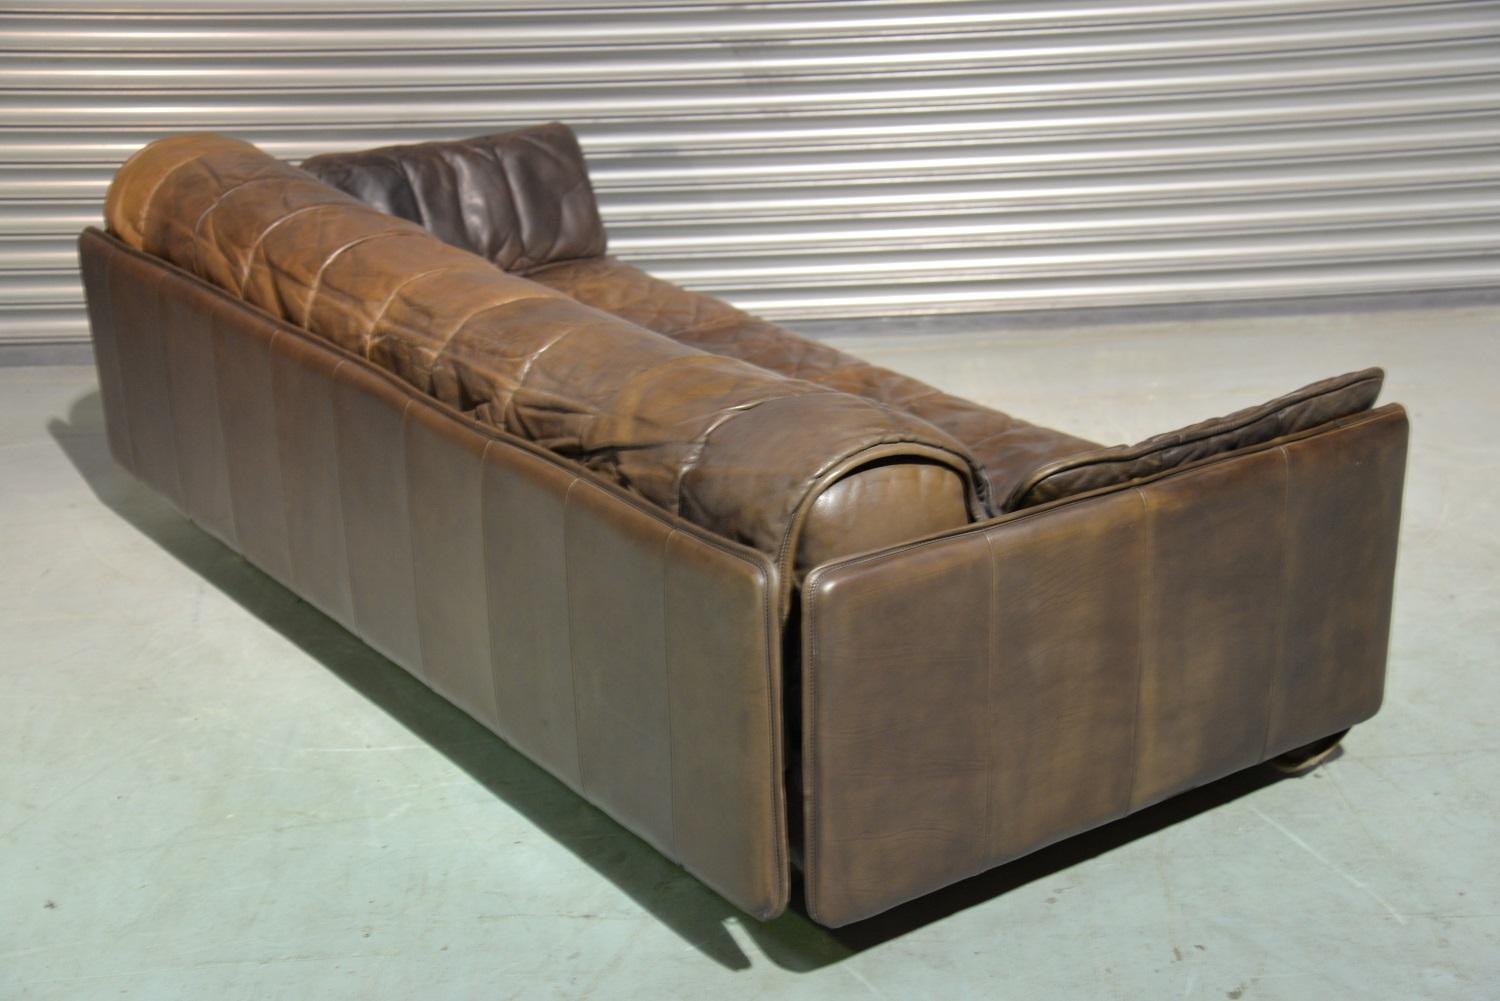 Vintage De Sede Patchwork Leather Sofa / Daybed, Switzerland, 1970s In Good Condition For Sale In Fen Drayton, Cambridgeshire